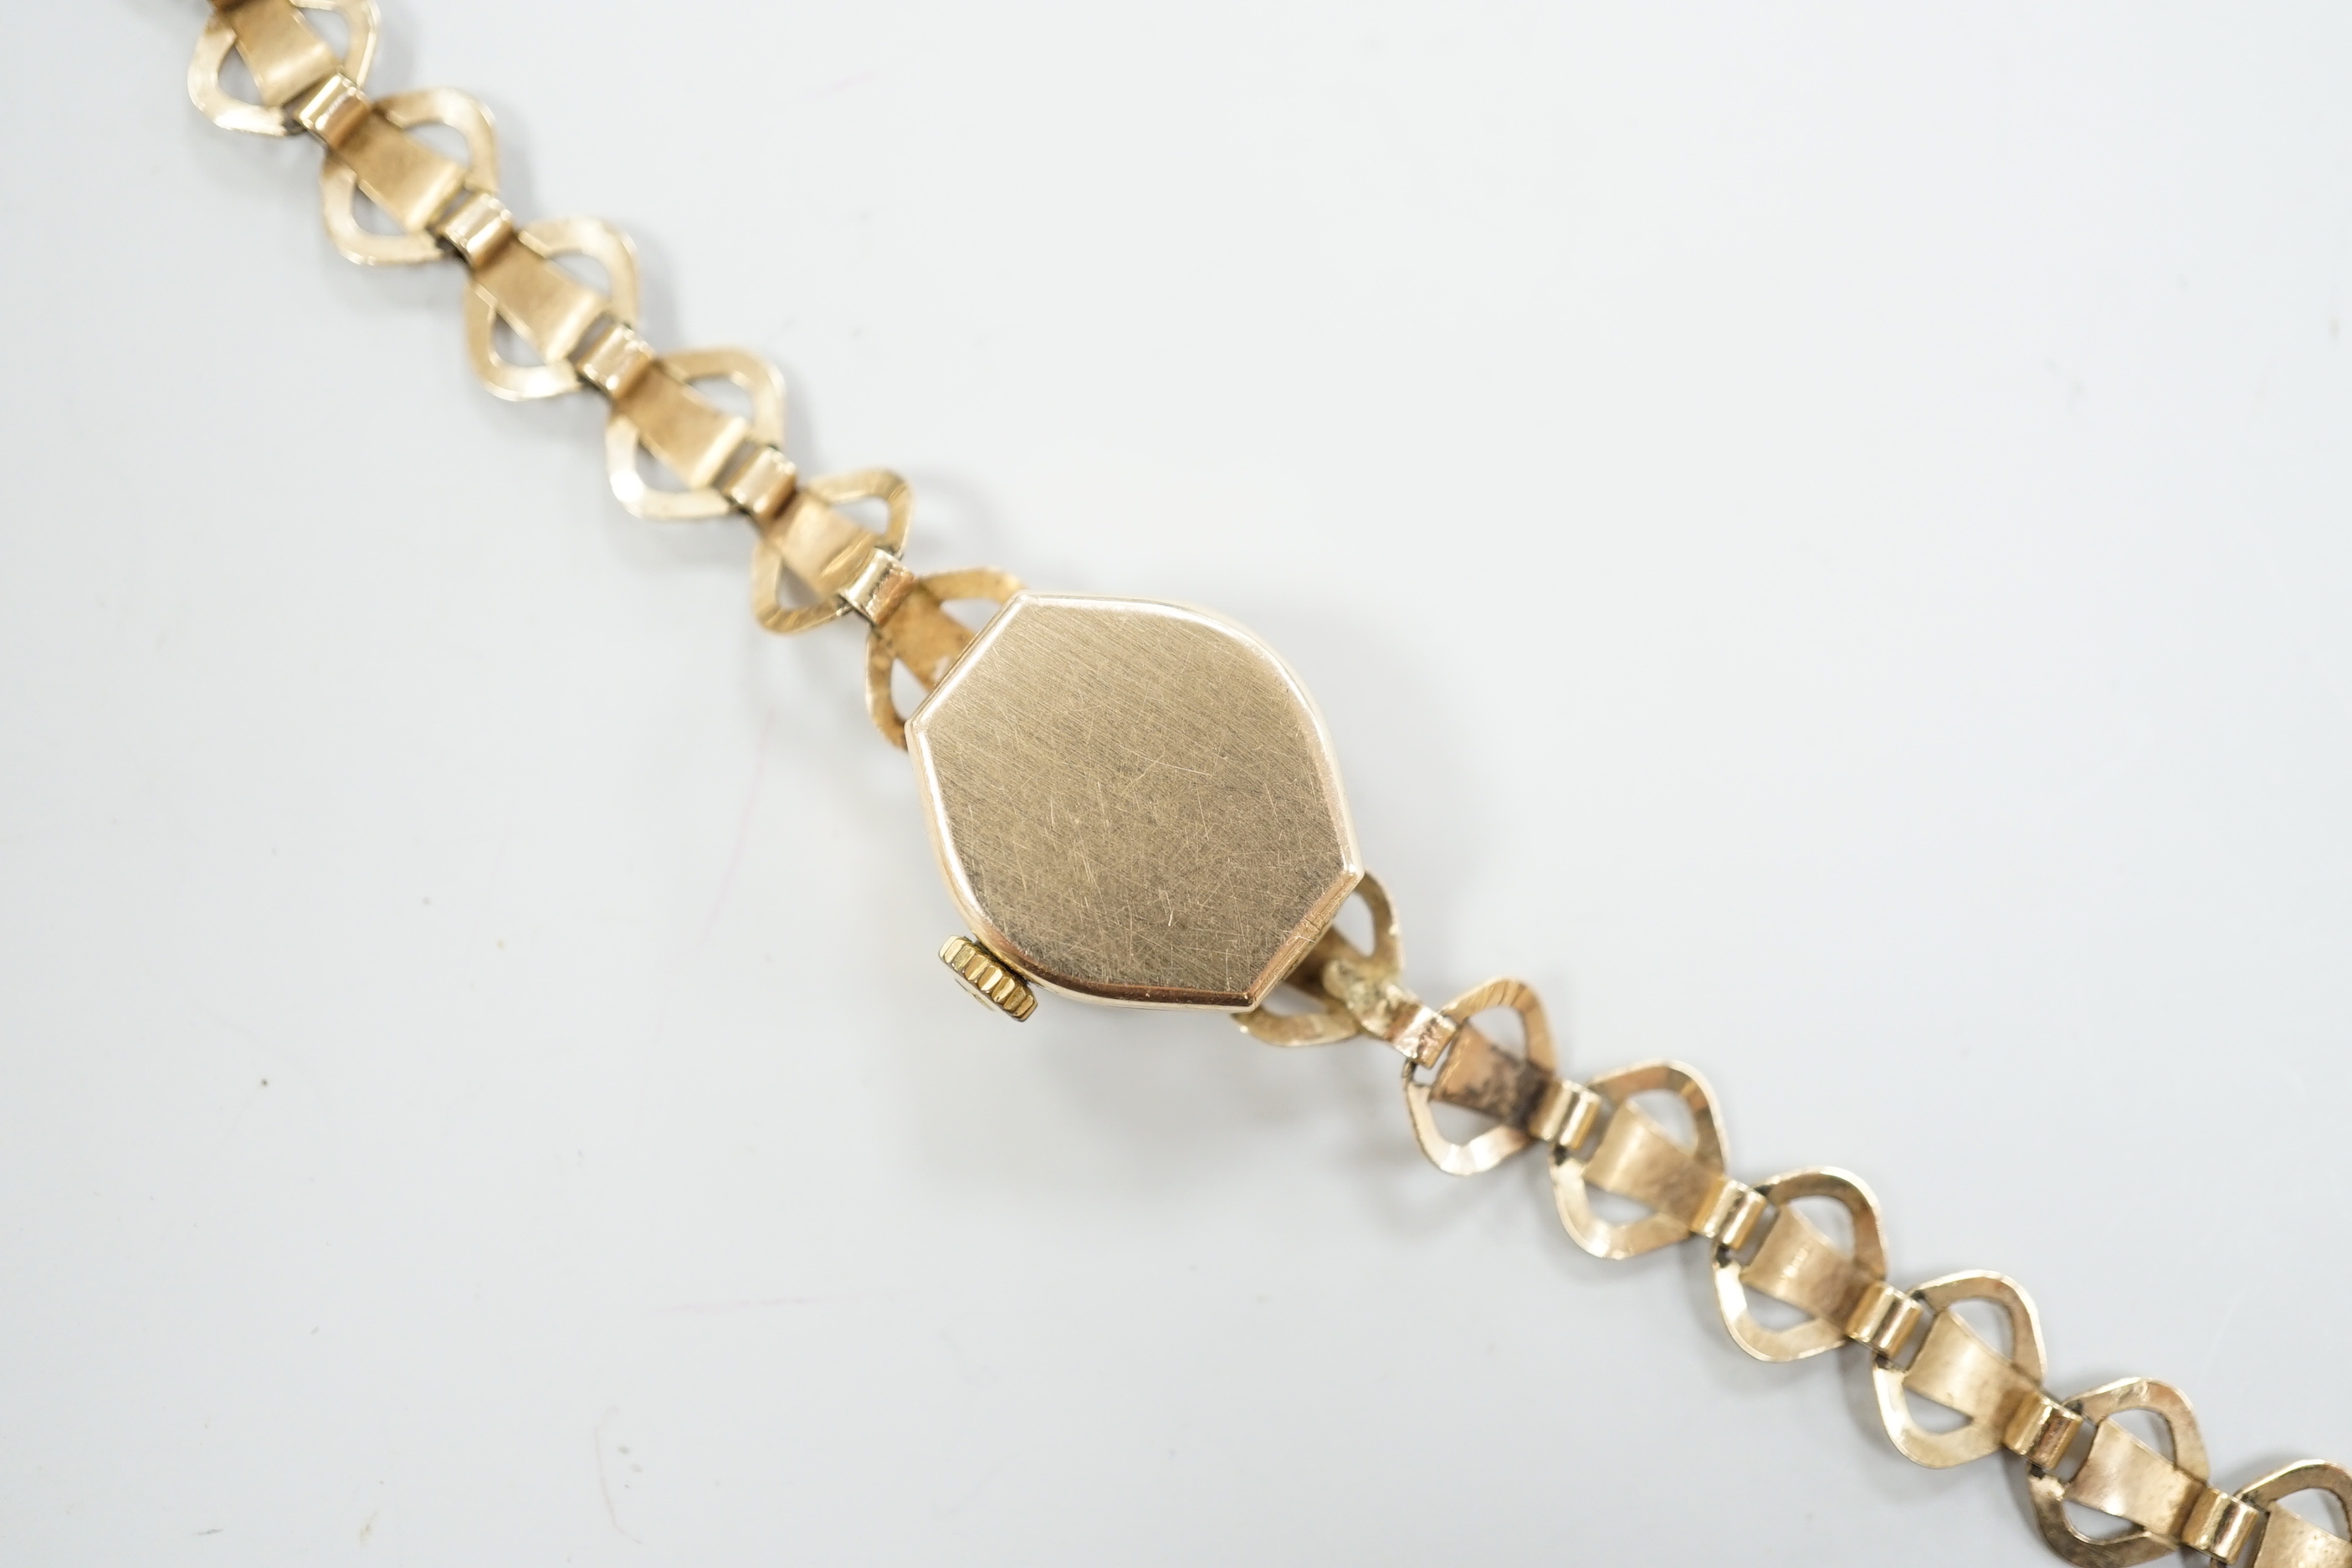 A lady's 9ct gold Avia manual wind wrist watch, on a 9ct gold bracelet, overall length 18cm, gross weight 9.3 grams.